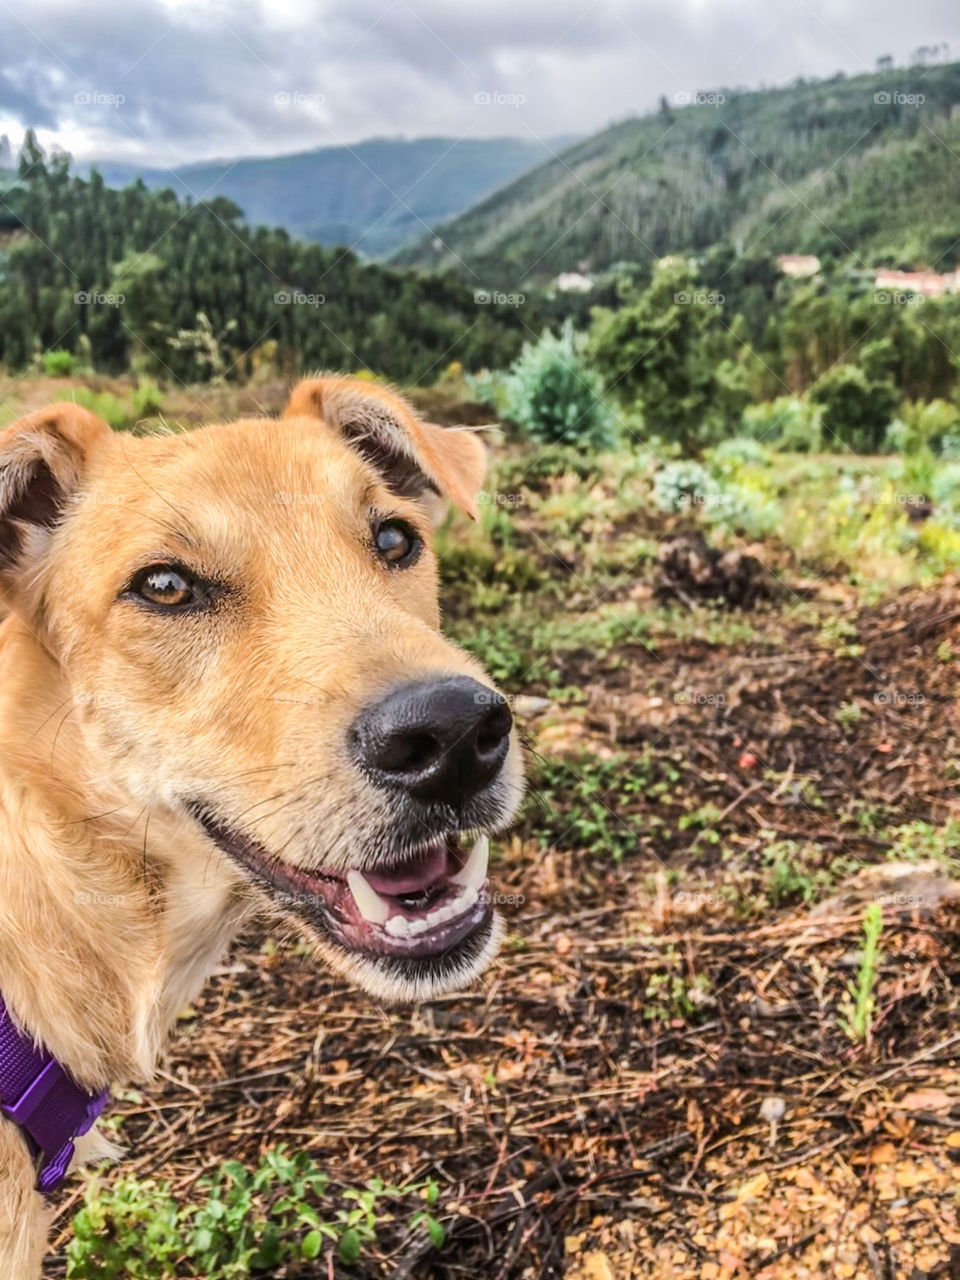 A happy, smiling dog is looking forward to an adventurous walk